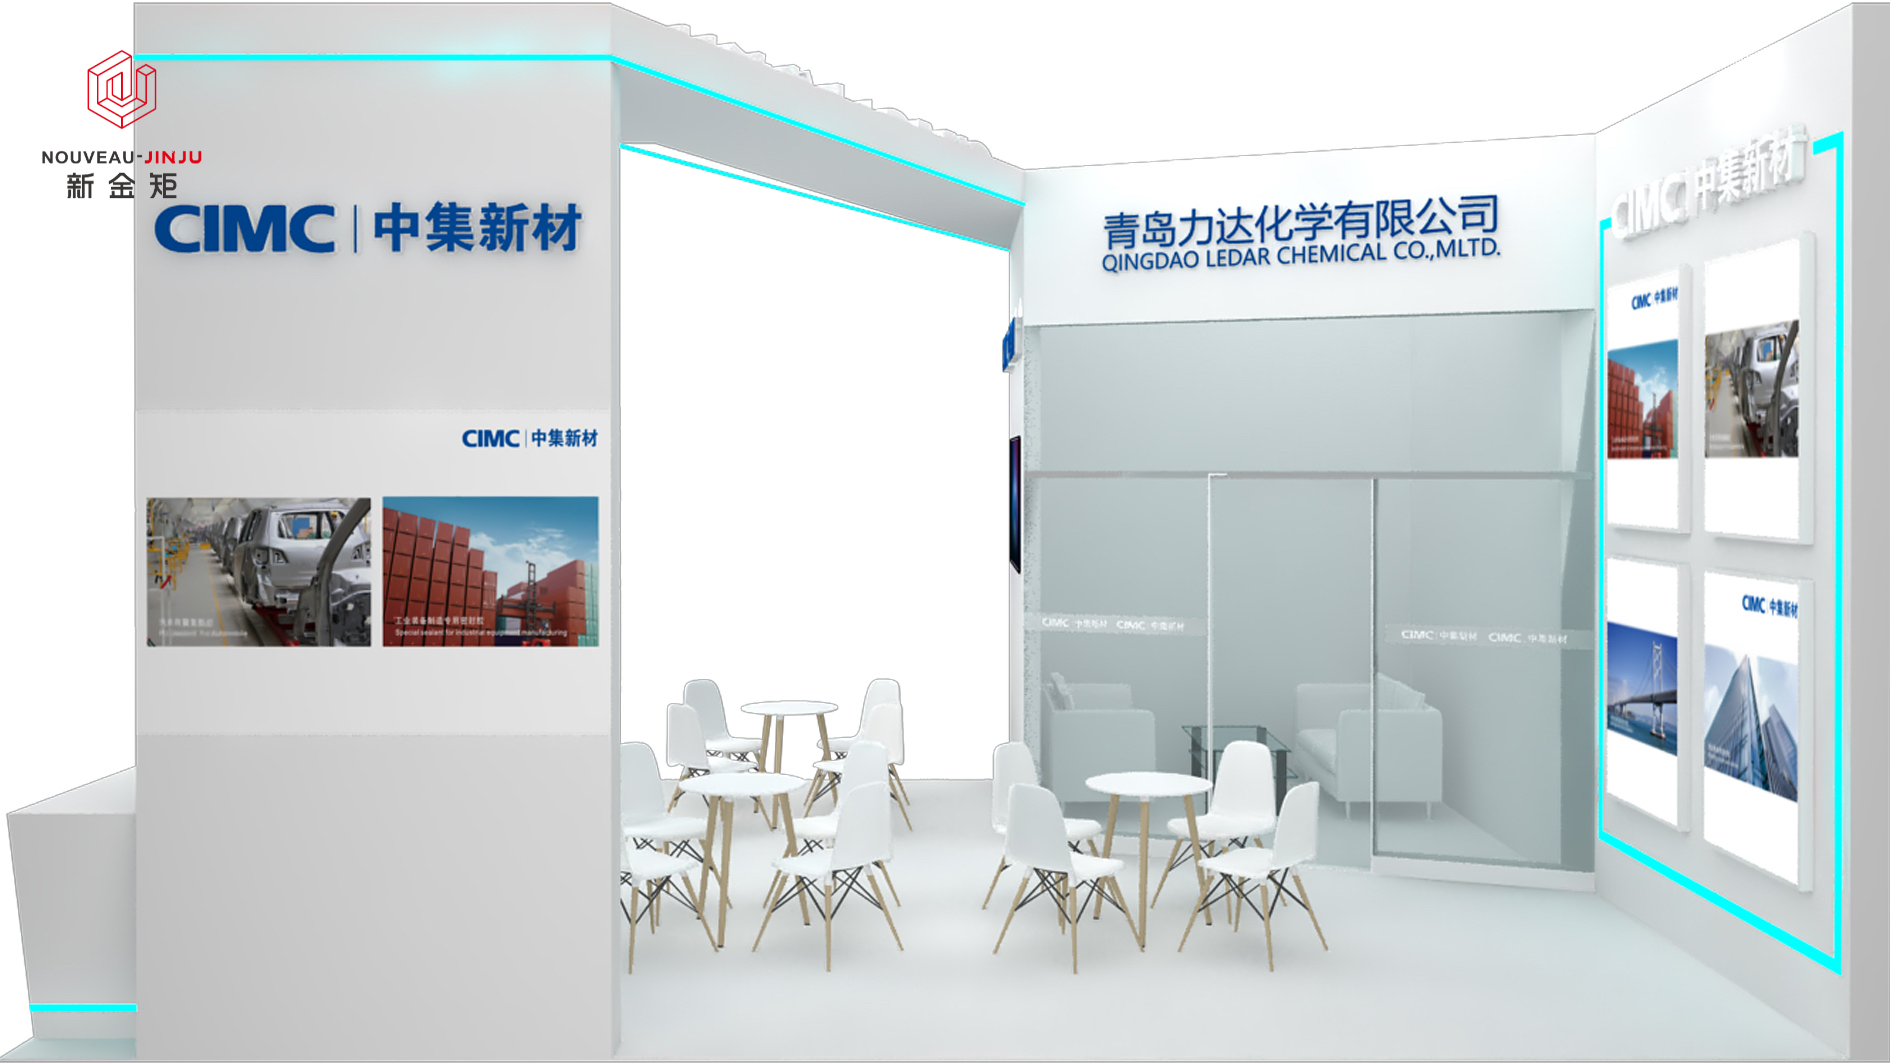 　　Booth Design|Simple but Not Simple Booth Design 　　Project Name:CIMC New Materials·Booth Design 　　Coordinates:Shanghai 　　Project type:exhibition design,booth design,exhibition beauty display 　　Display style:fresh and minimalist 　　Theme tone:white,blue 　　Design Description: 　　The booth is mainly in blue and white,fully showcasing the style of modern technology.The entire space is filled with a minimalist sense of technology,with the main colors of white and blue adding freshness and simplicity.Entering the exhibition area,the first thing that catches your eye is a large poster that reads"CIMC New Materials"to showcase the company's core brand.At the bottom of the poster,a series of exhibits are carefully selected and designed to showcase the company's diversified business and technological strength.The design of the entire exhibition area showcases the technological strength and innovative spirit of Chinese enterprises.Every detail is cleverly designed to showcase the company's unique charm and brand image.This exhibition area is not only a simple display space,but also an interactive platform full of technology and creativity.